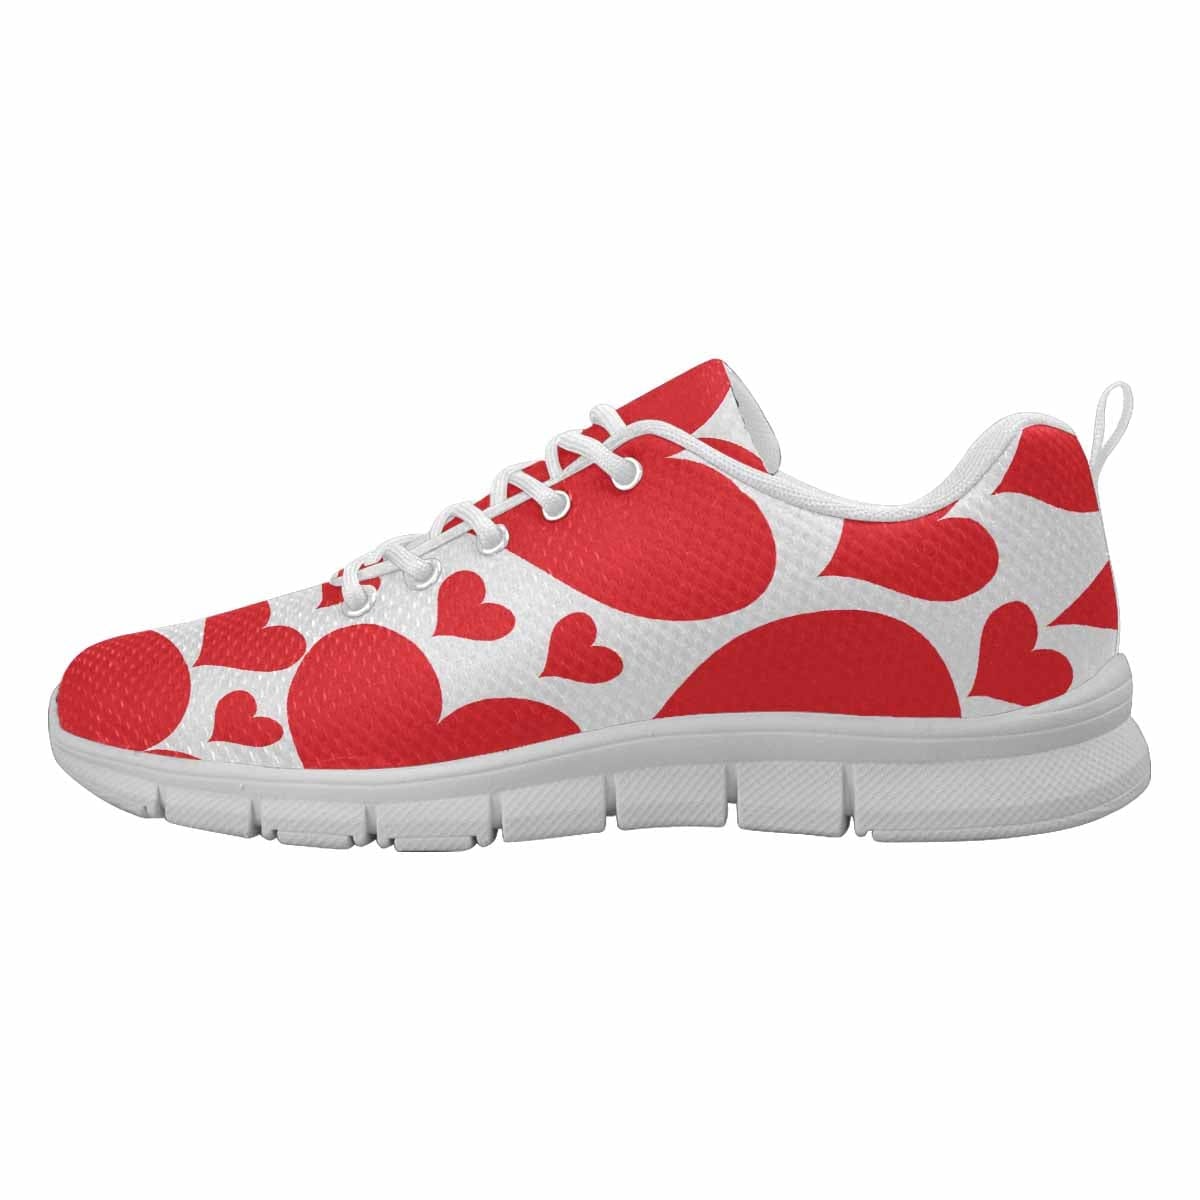 Sneakers For Women Love Red Hearts - S893 - Womens | Sneakers | Running